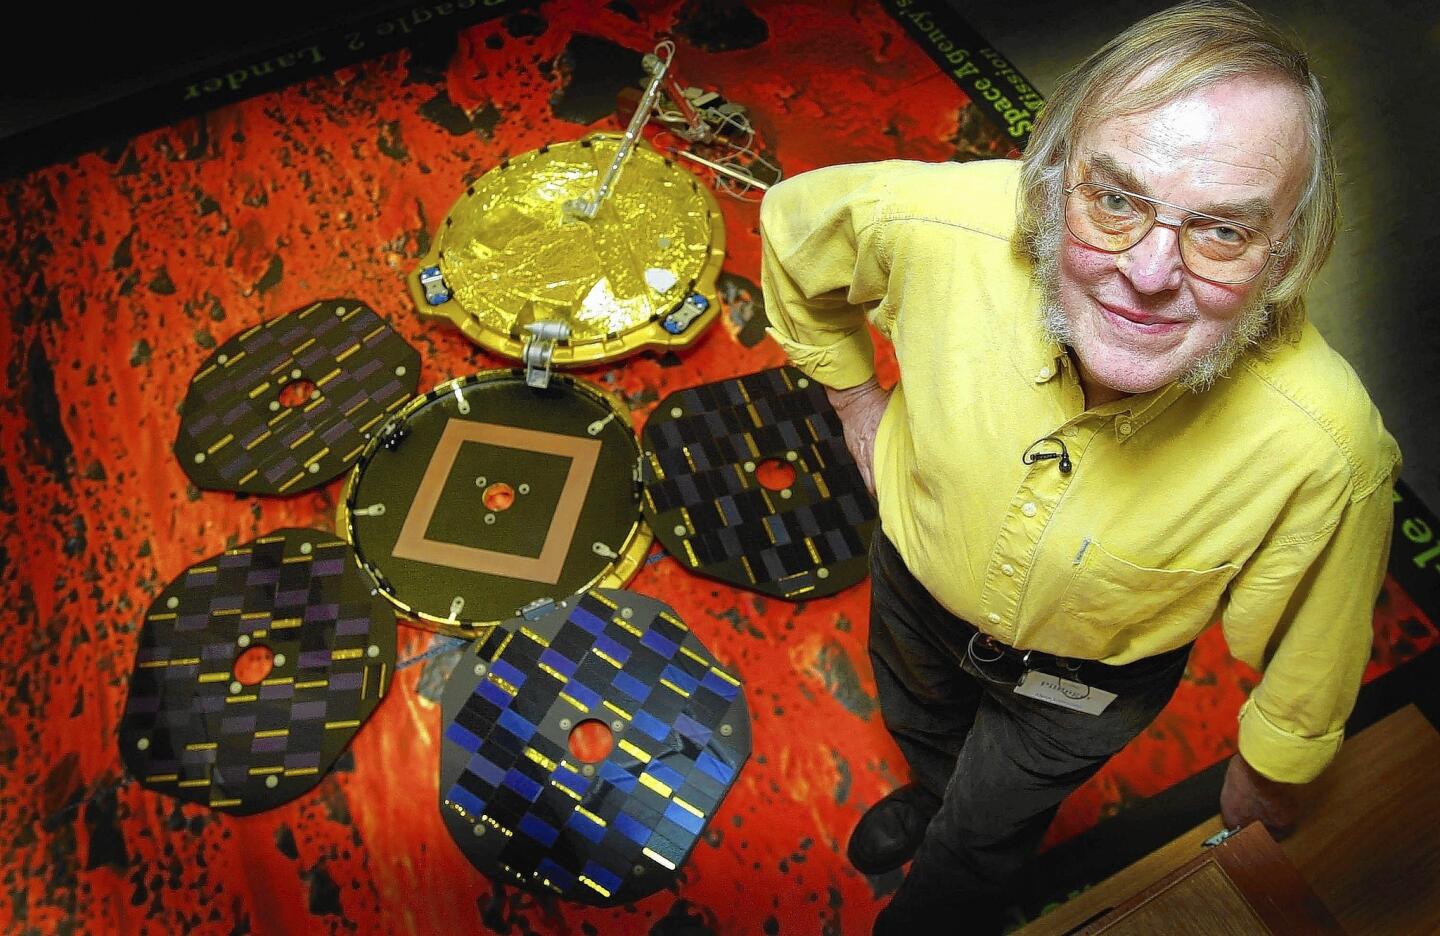 Scientist Colin Pillinger poses with a model of Beagle 2 in 2003.